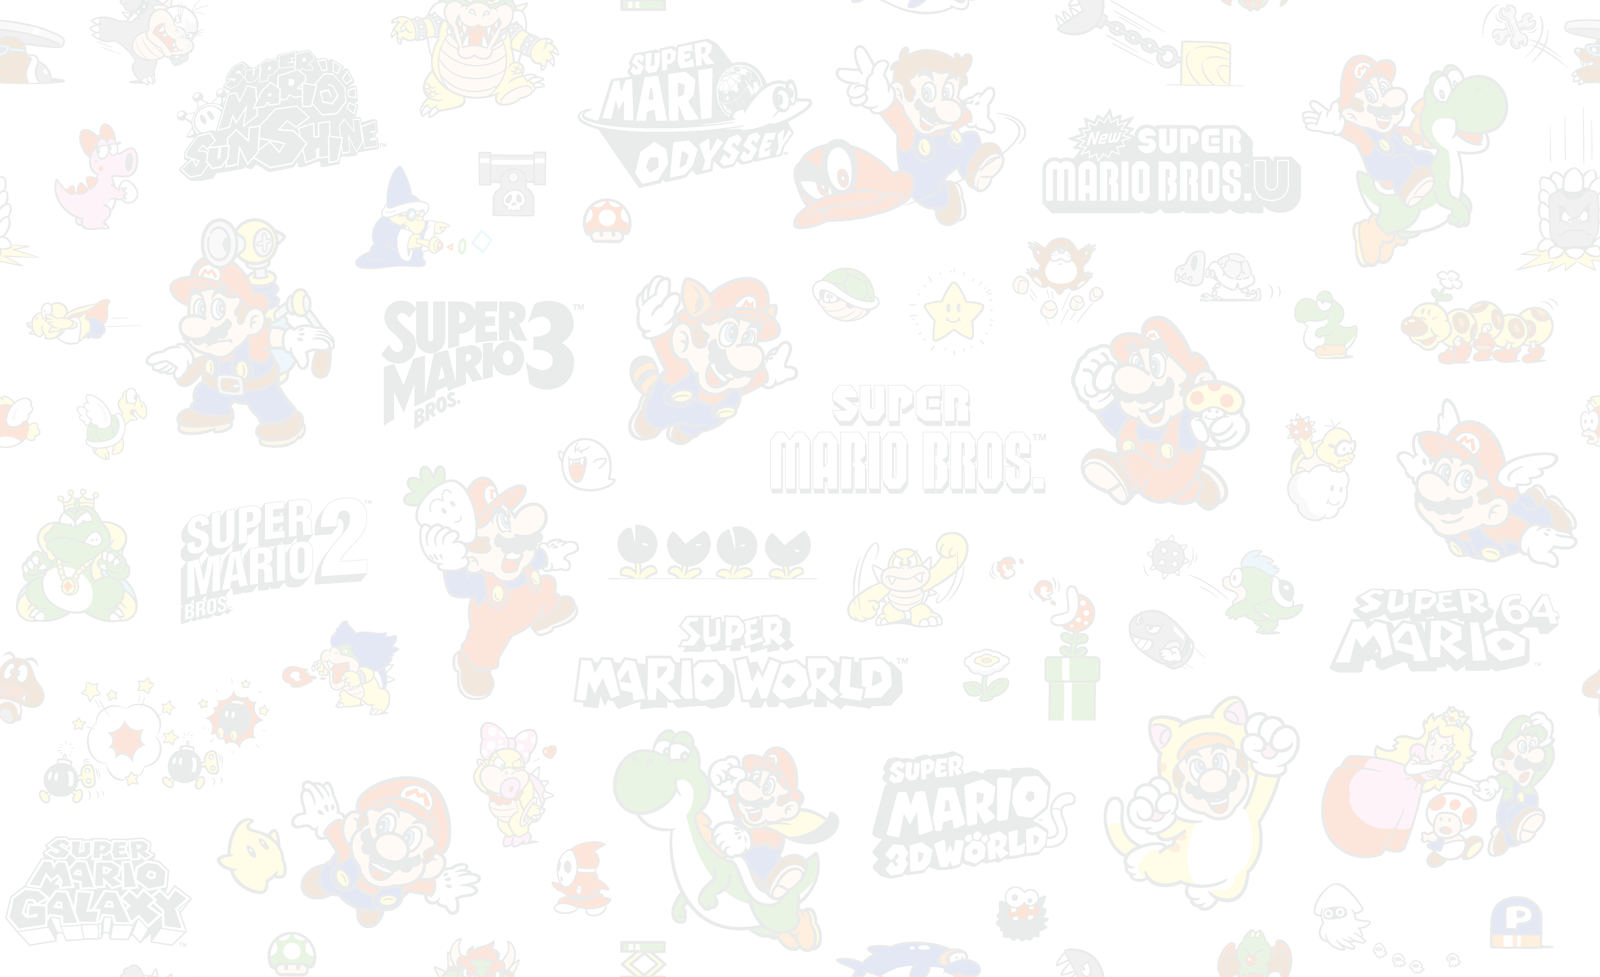 A background made for the 35th Anniversary of Super Mario Bros.